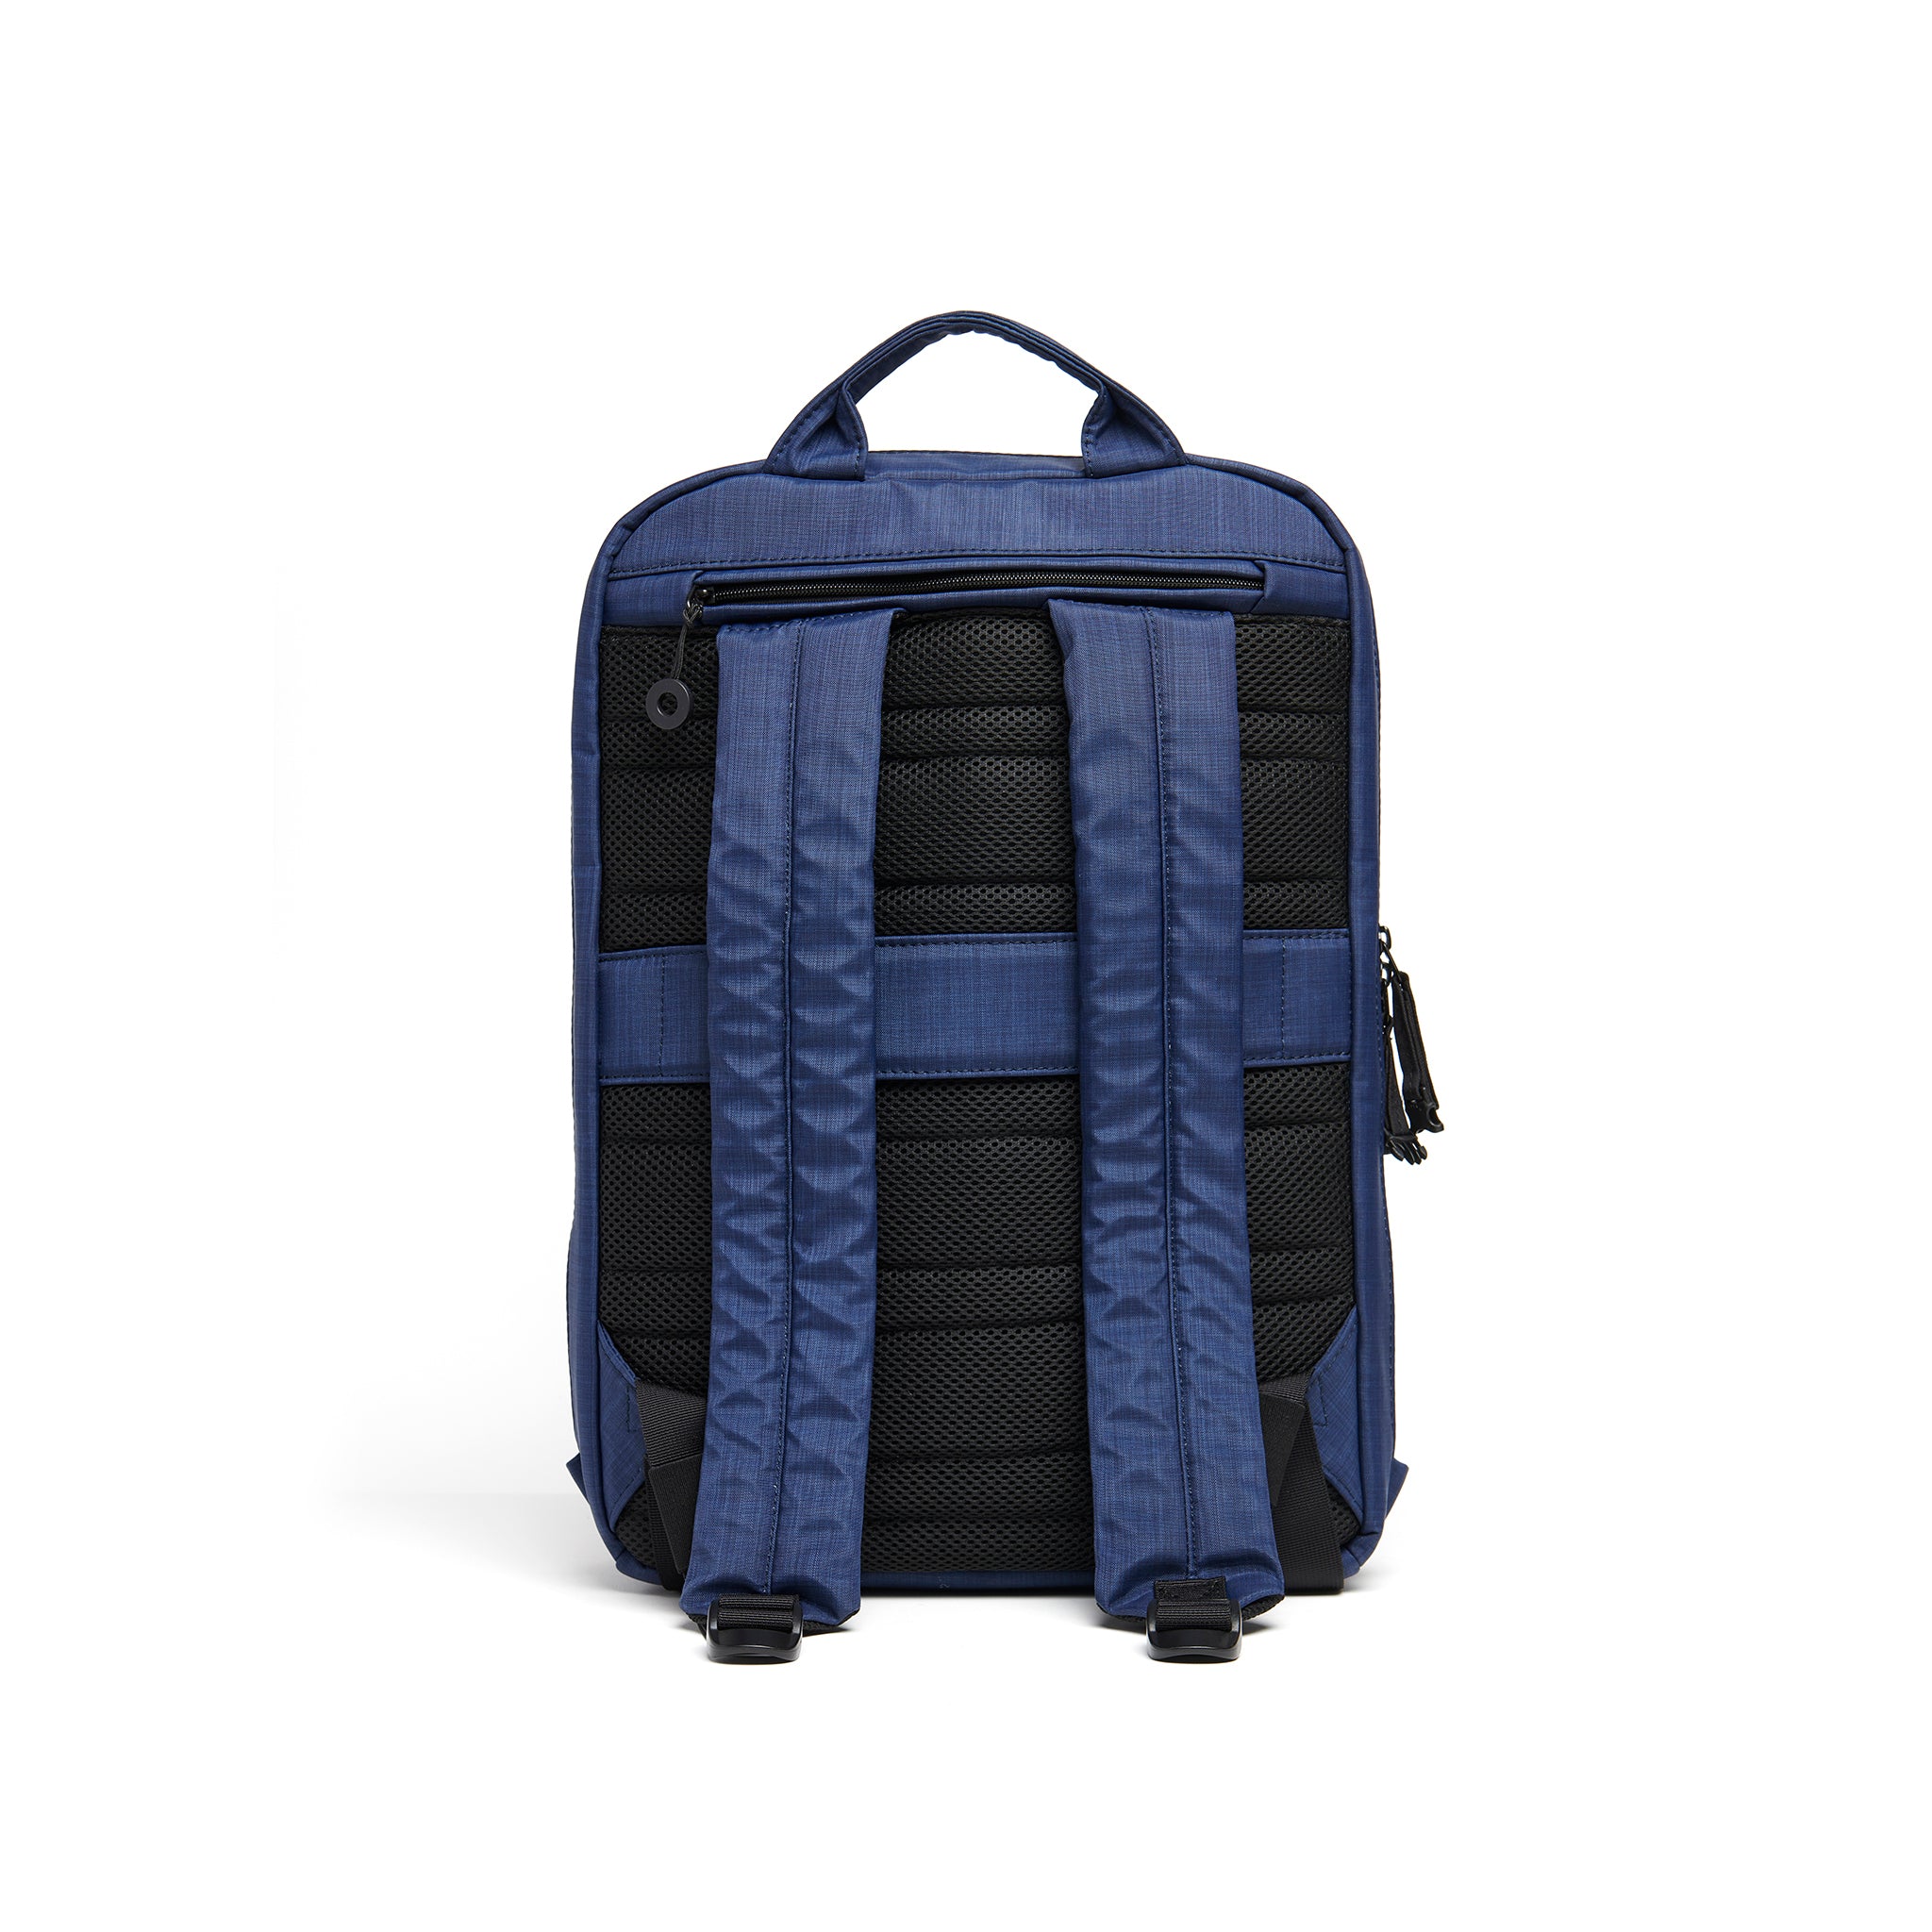 Mueslii daily backpack, made of  water resistant canvas nylon, with a laptop compartment, color ocean blue, back view.